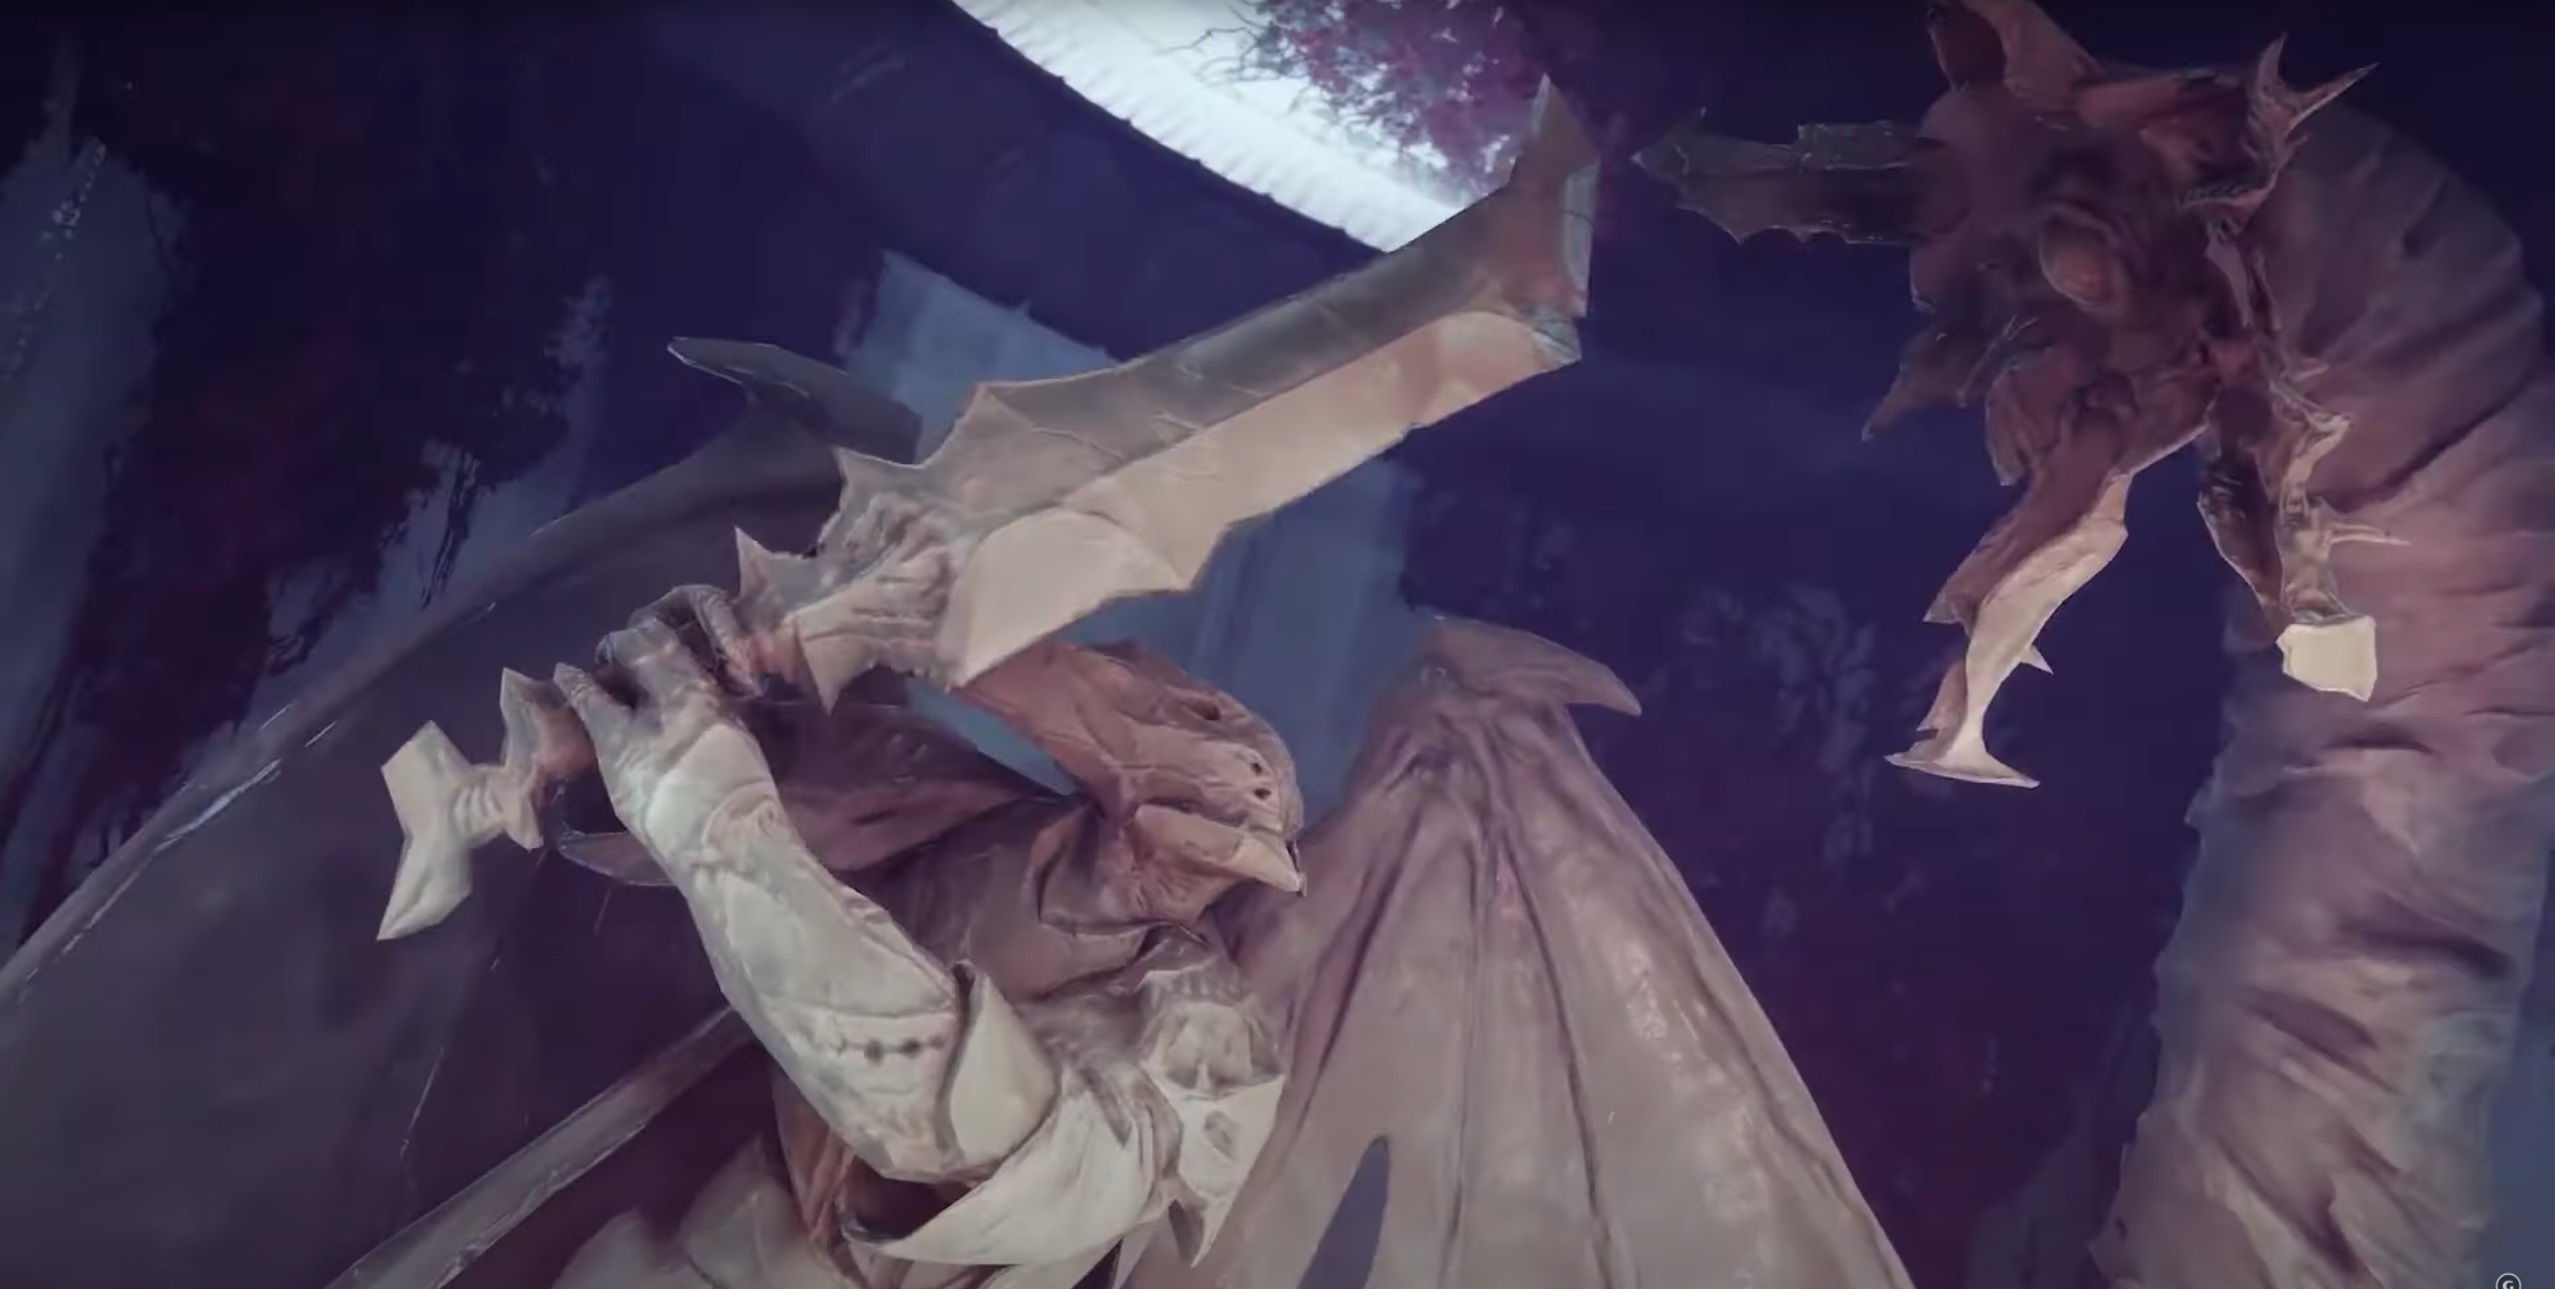 Oryx's history is extremely important to Savathun and The Witch Queen, but despite revisiting our victory of Oryx, the raid teaches us nothing about him.